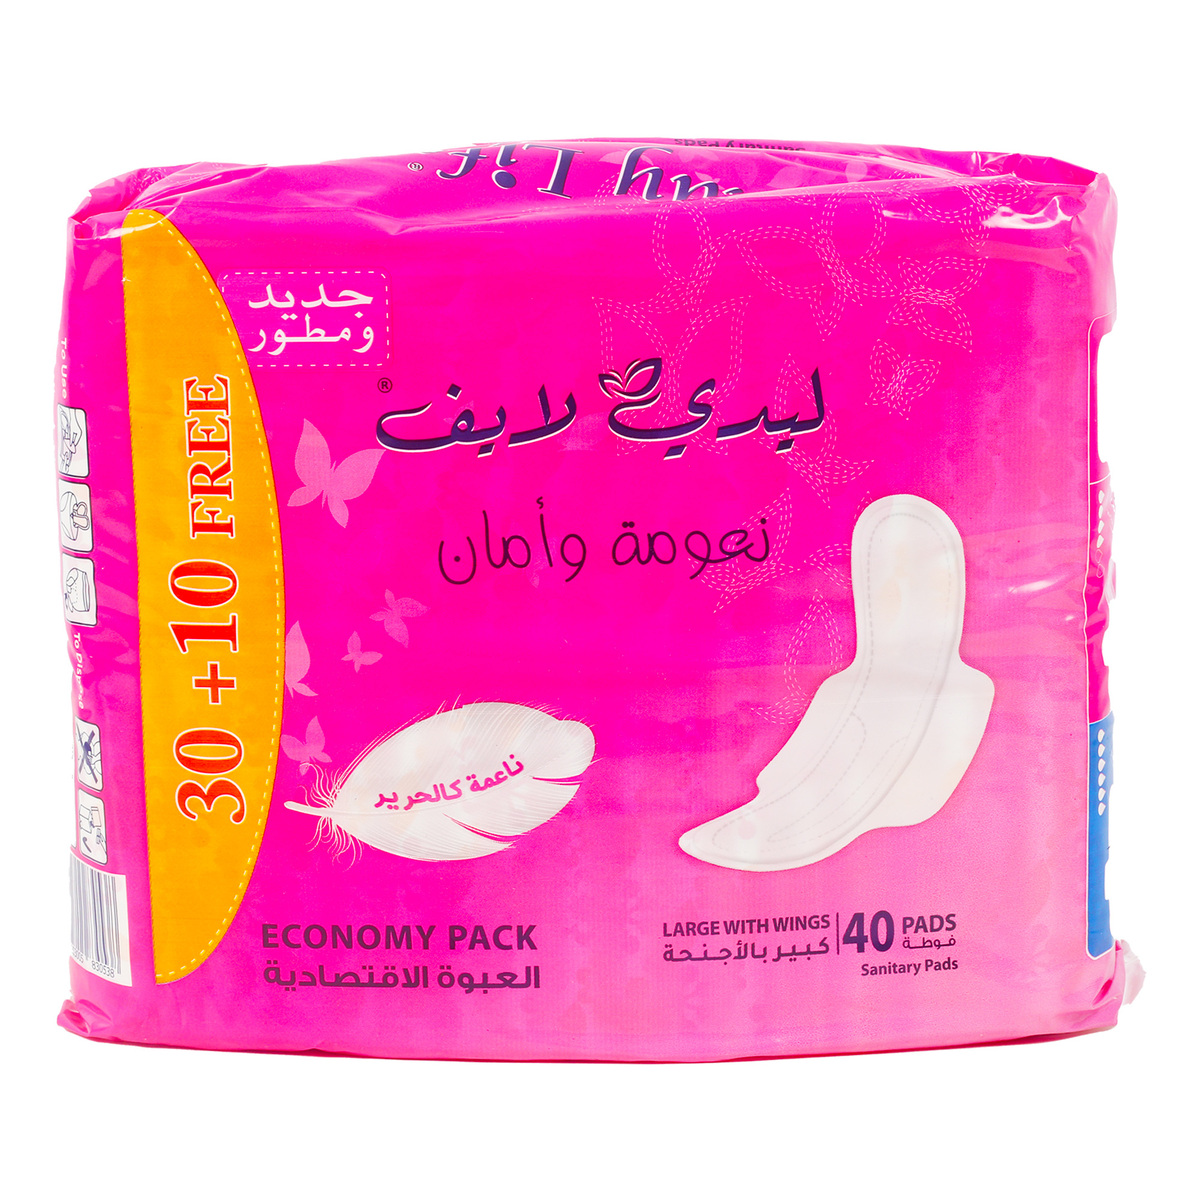 Lady Life Soft & Secure Sanitary Pads with Wings Large 40 pcs